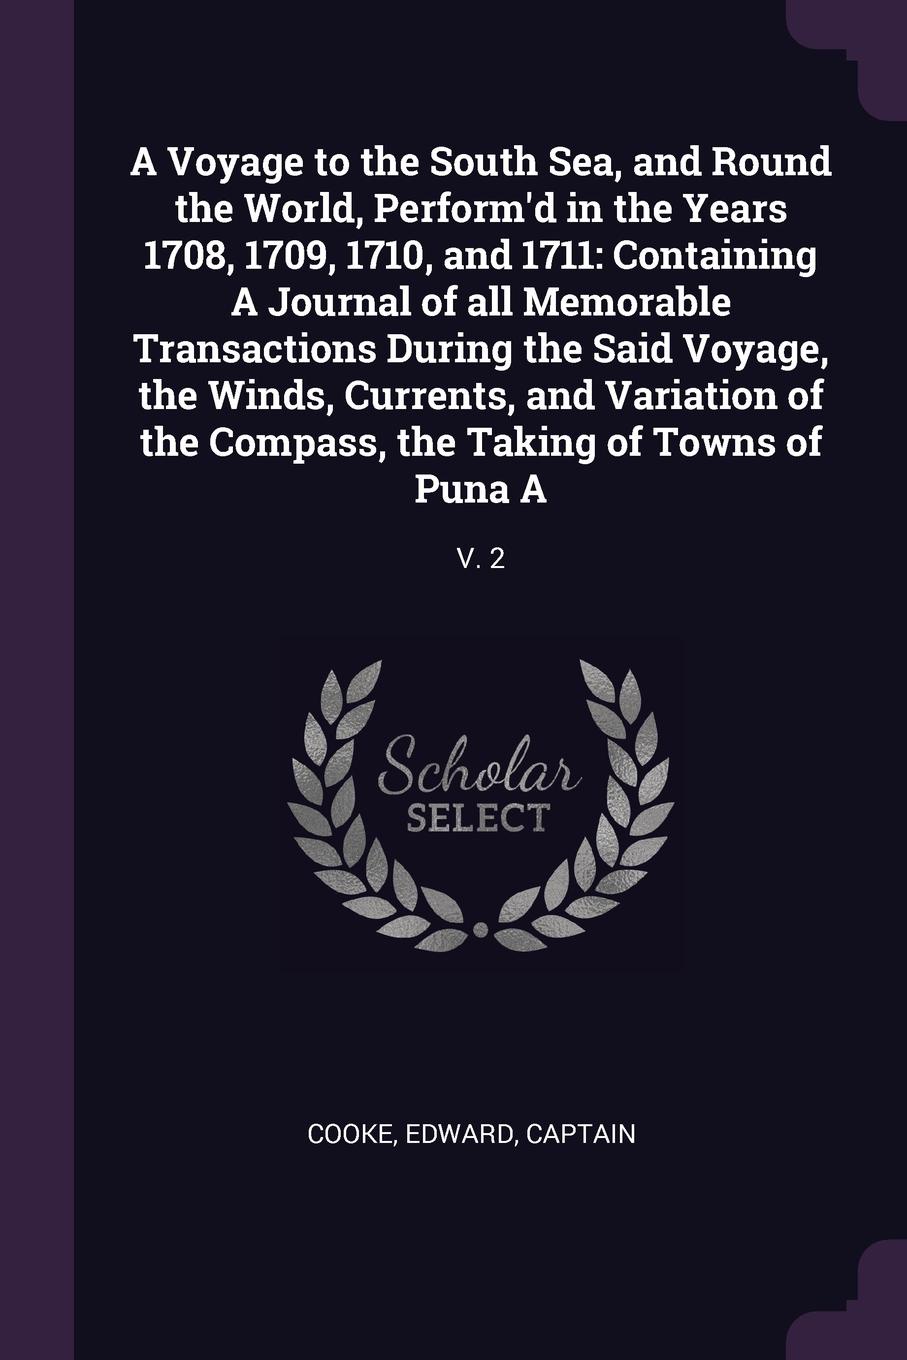 A Voyage to the South Sea, and Round the World, Perform`d in the Years 1708, 1709, 1710, and 1711. Containing A Journal of all Memorable Transactions During the Said Voyage, the Winds, Currents, and Variation of the Compass, the Taking of Towns of...